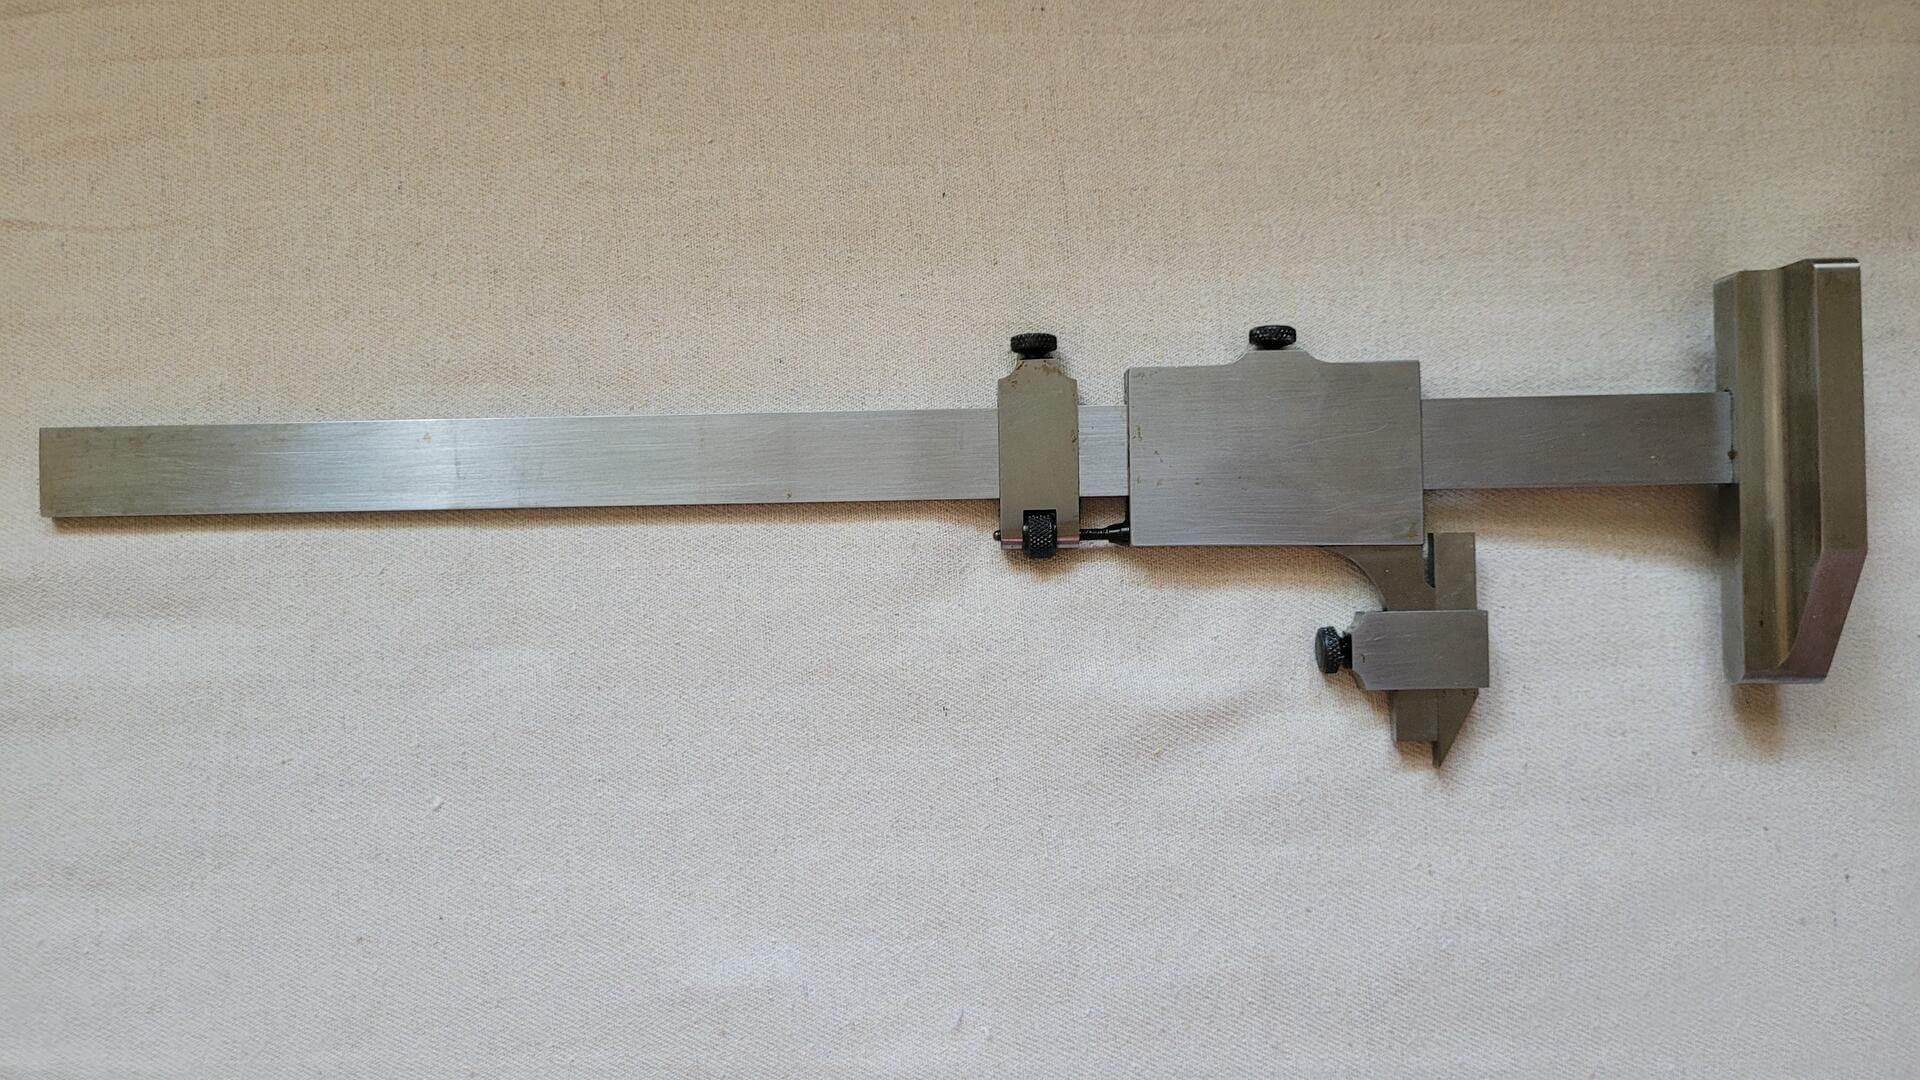 Rare Vintage Vernier Height Gauge with depth gauge attachement Staroba Industrial Research Toronto ON - Collectible made in Canada antique machinist tools